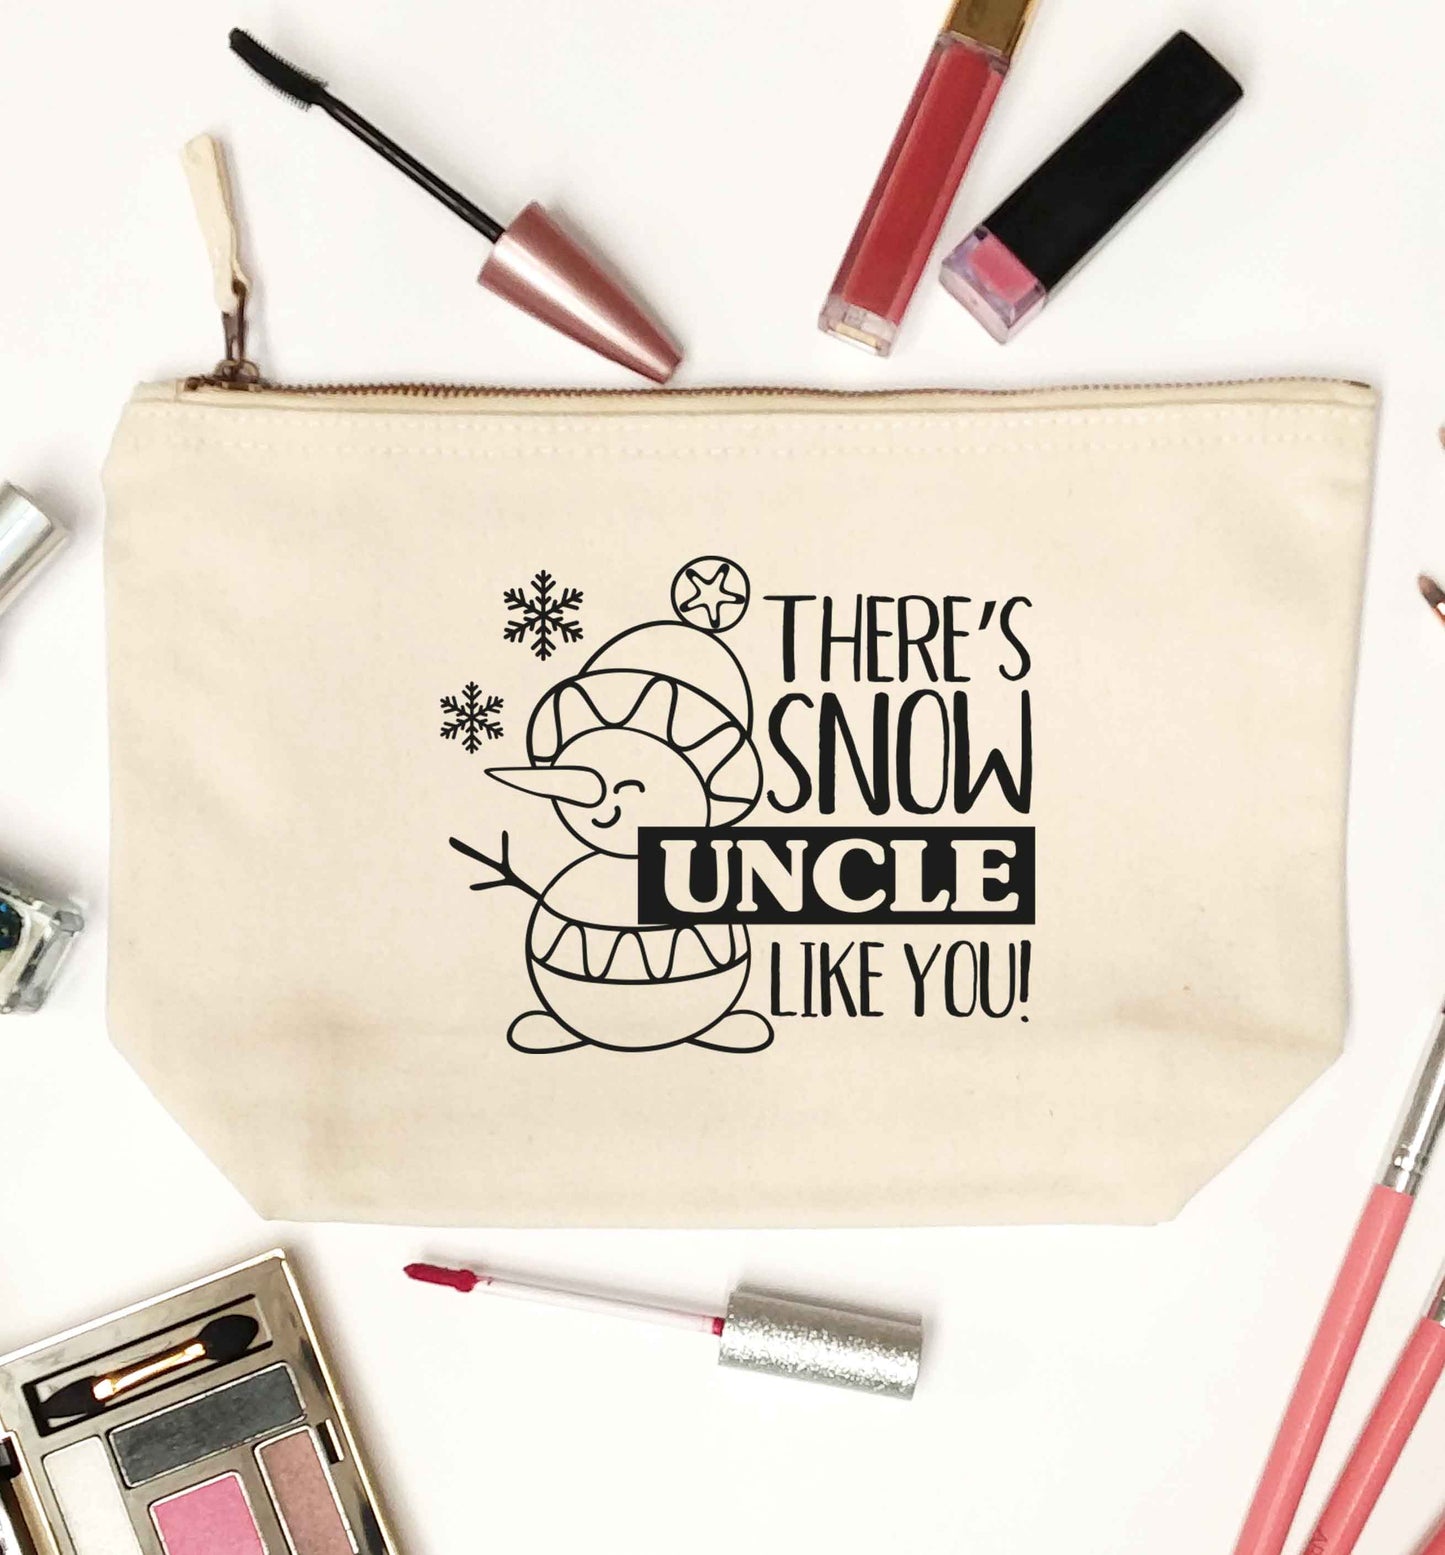 There's snow uncle like you natural makeup bag